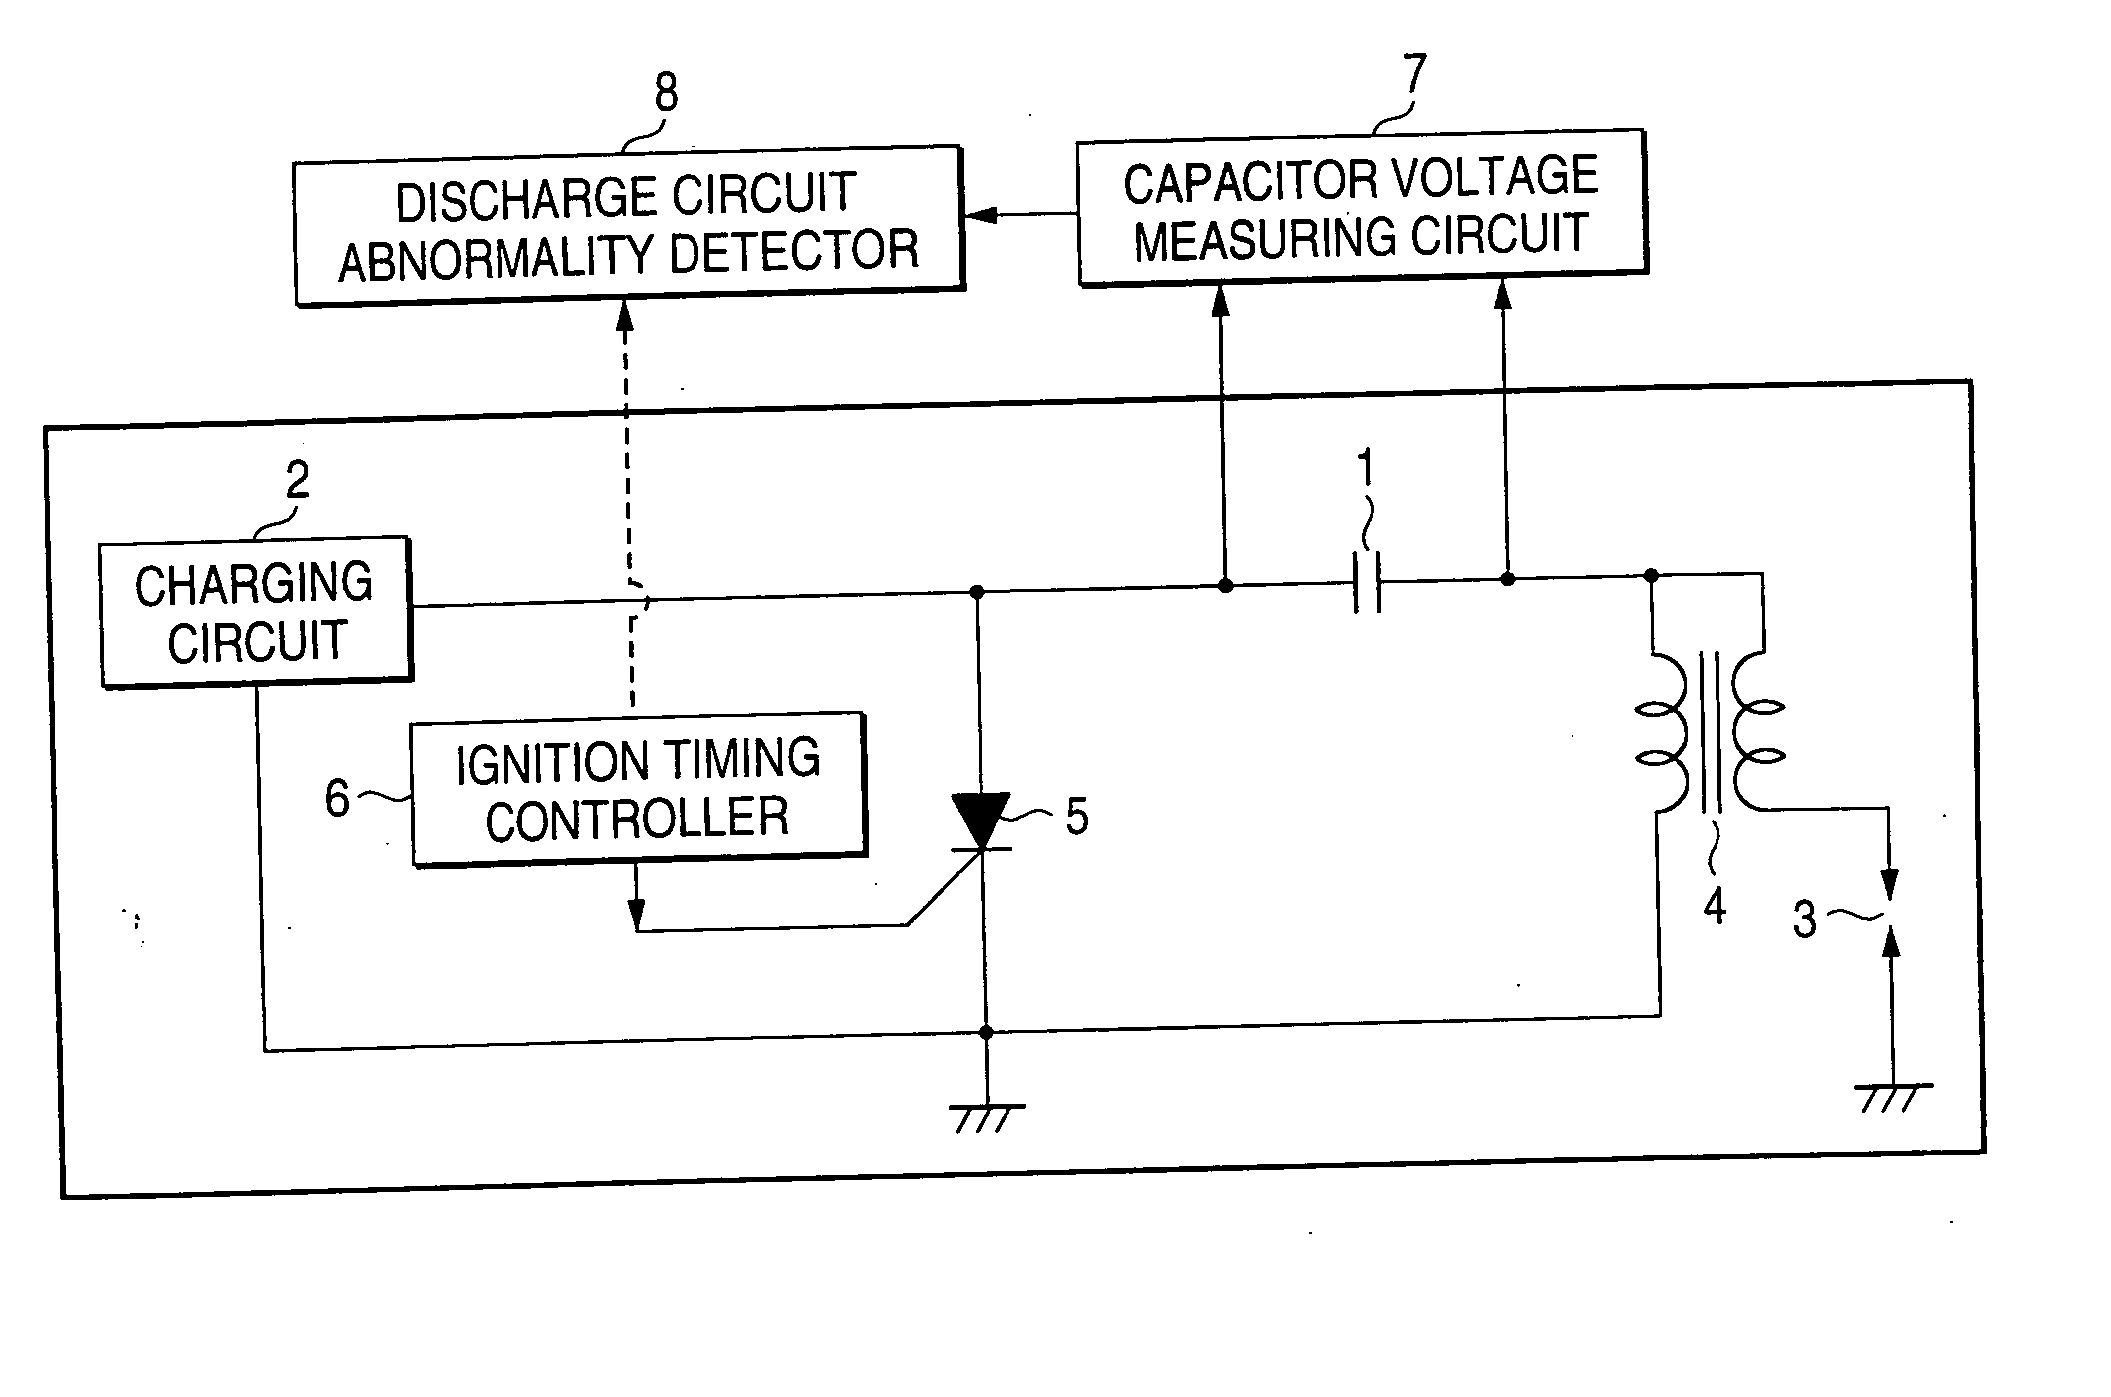 Capacitor discharge ignition device